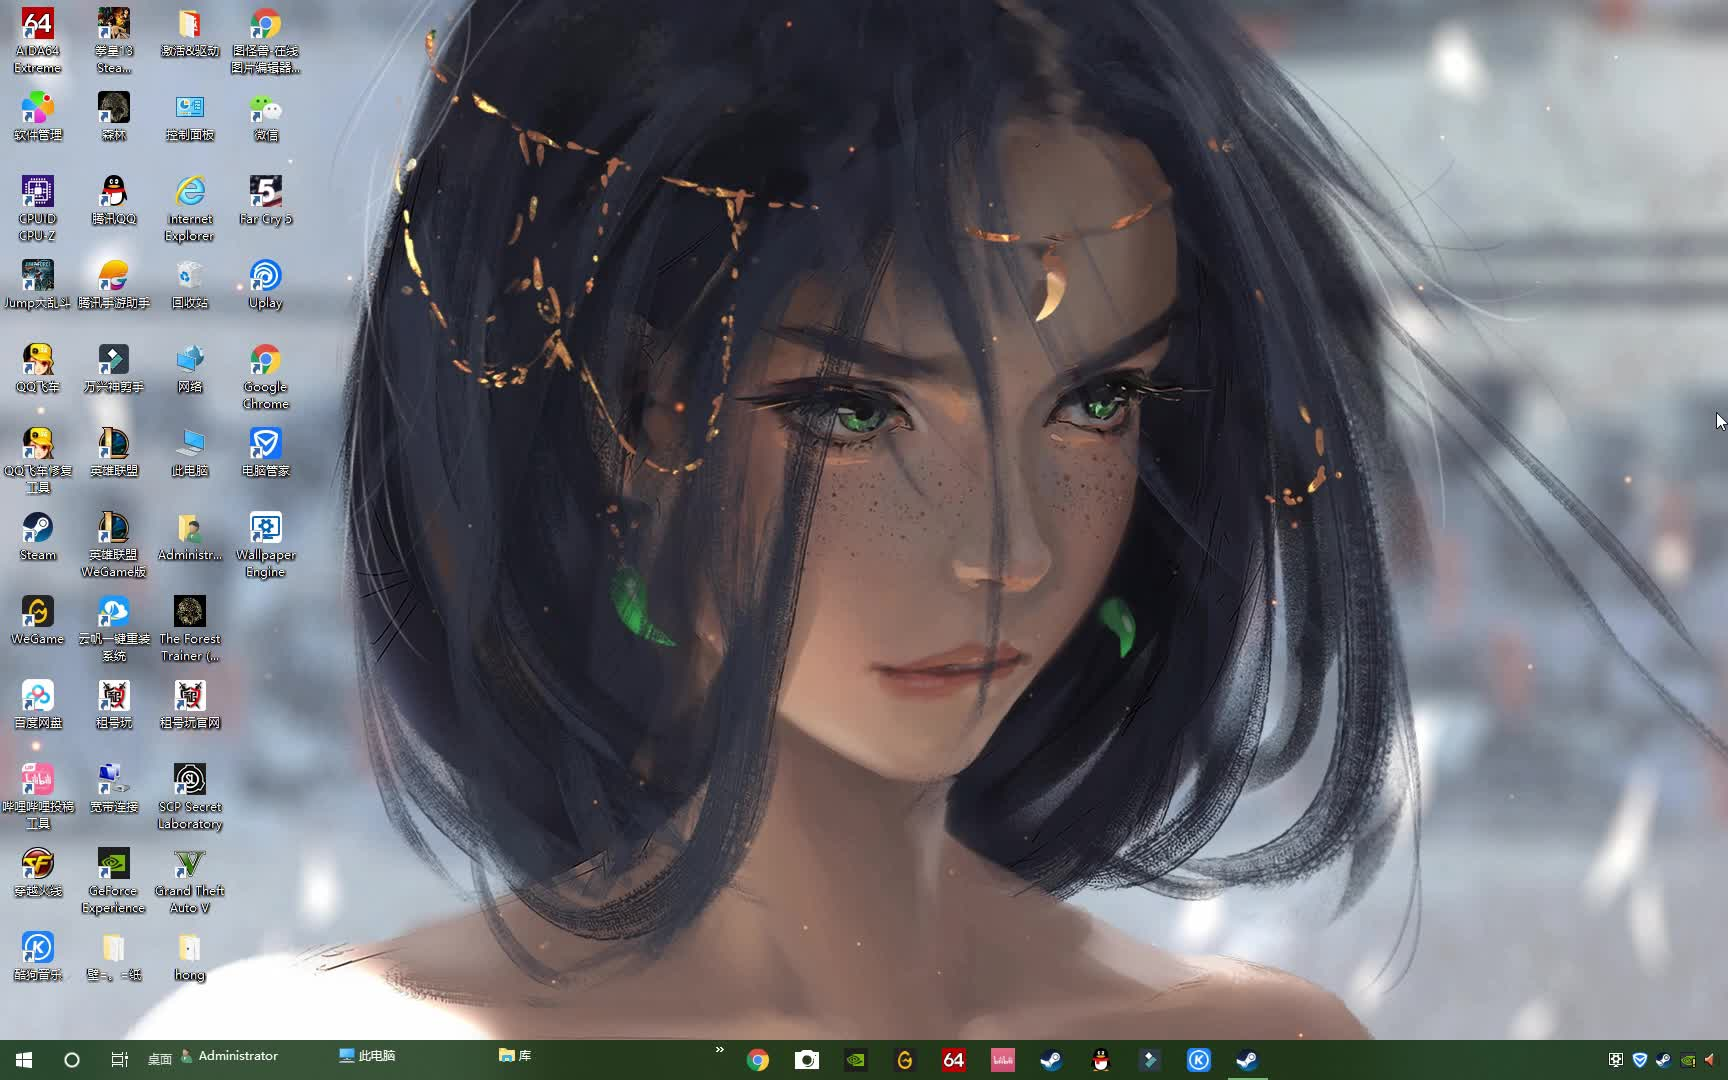 cant type in web wallpaper engine